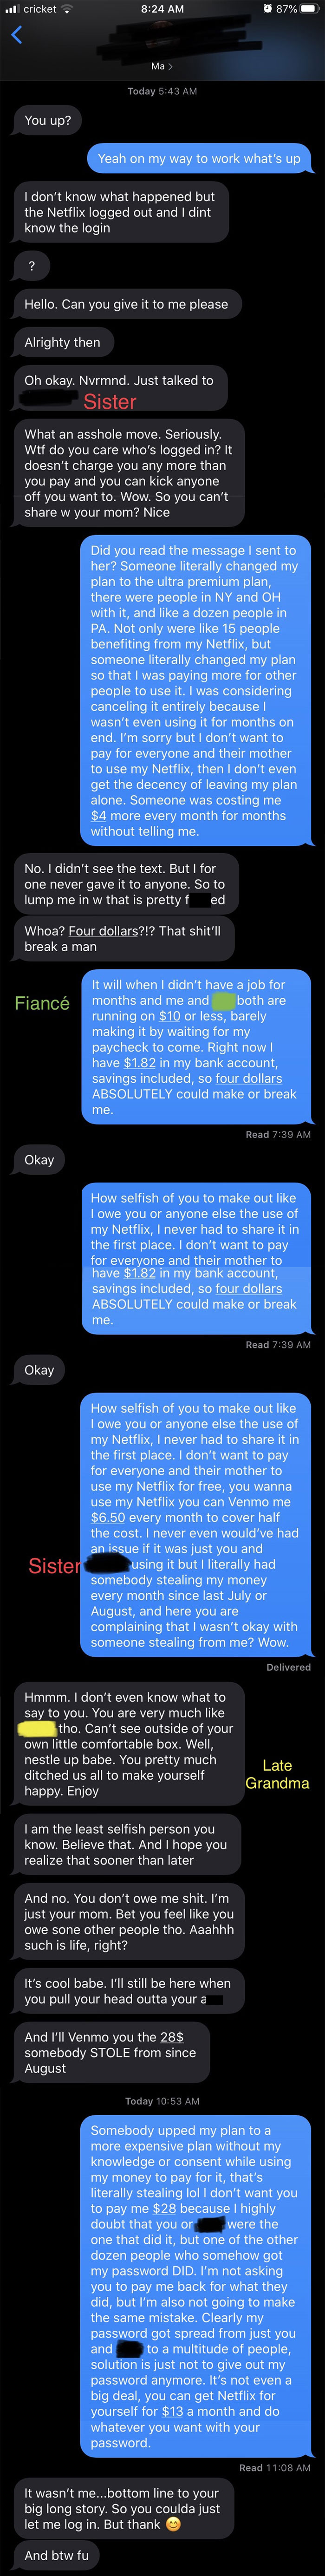 Shared My Netflix Years Ago With My Mom And Sister, Then Had An Issue Last Night So I Checked The Recent Devices. Found Out There Were Tons Of People With My Password, Plus Someone Upped My Plan. Reset My Password And Told My Sister I Wasn't Going To Share My Password Anymore. Chaos